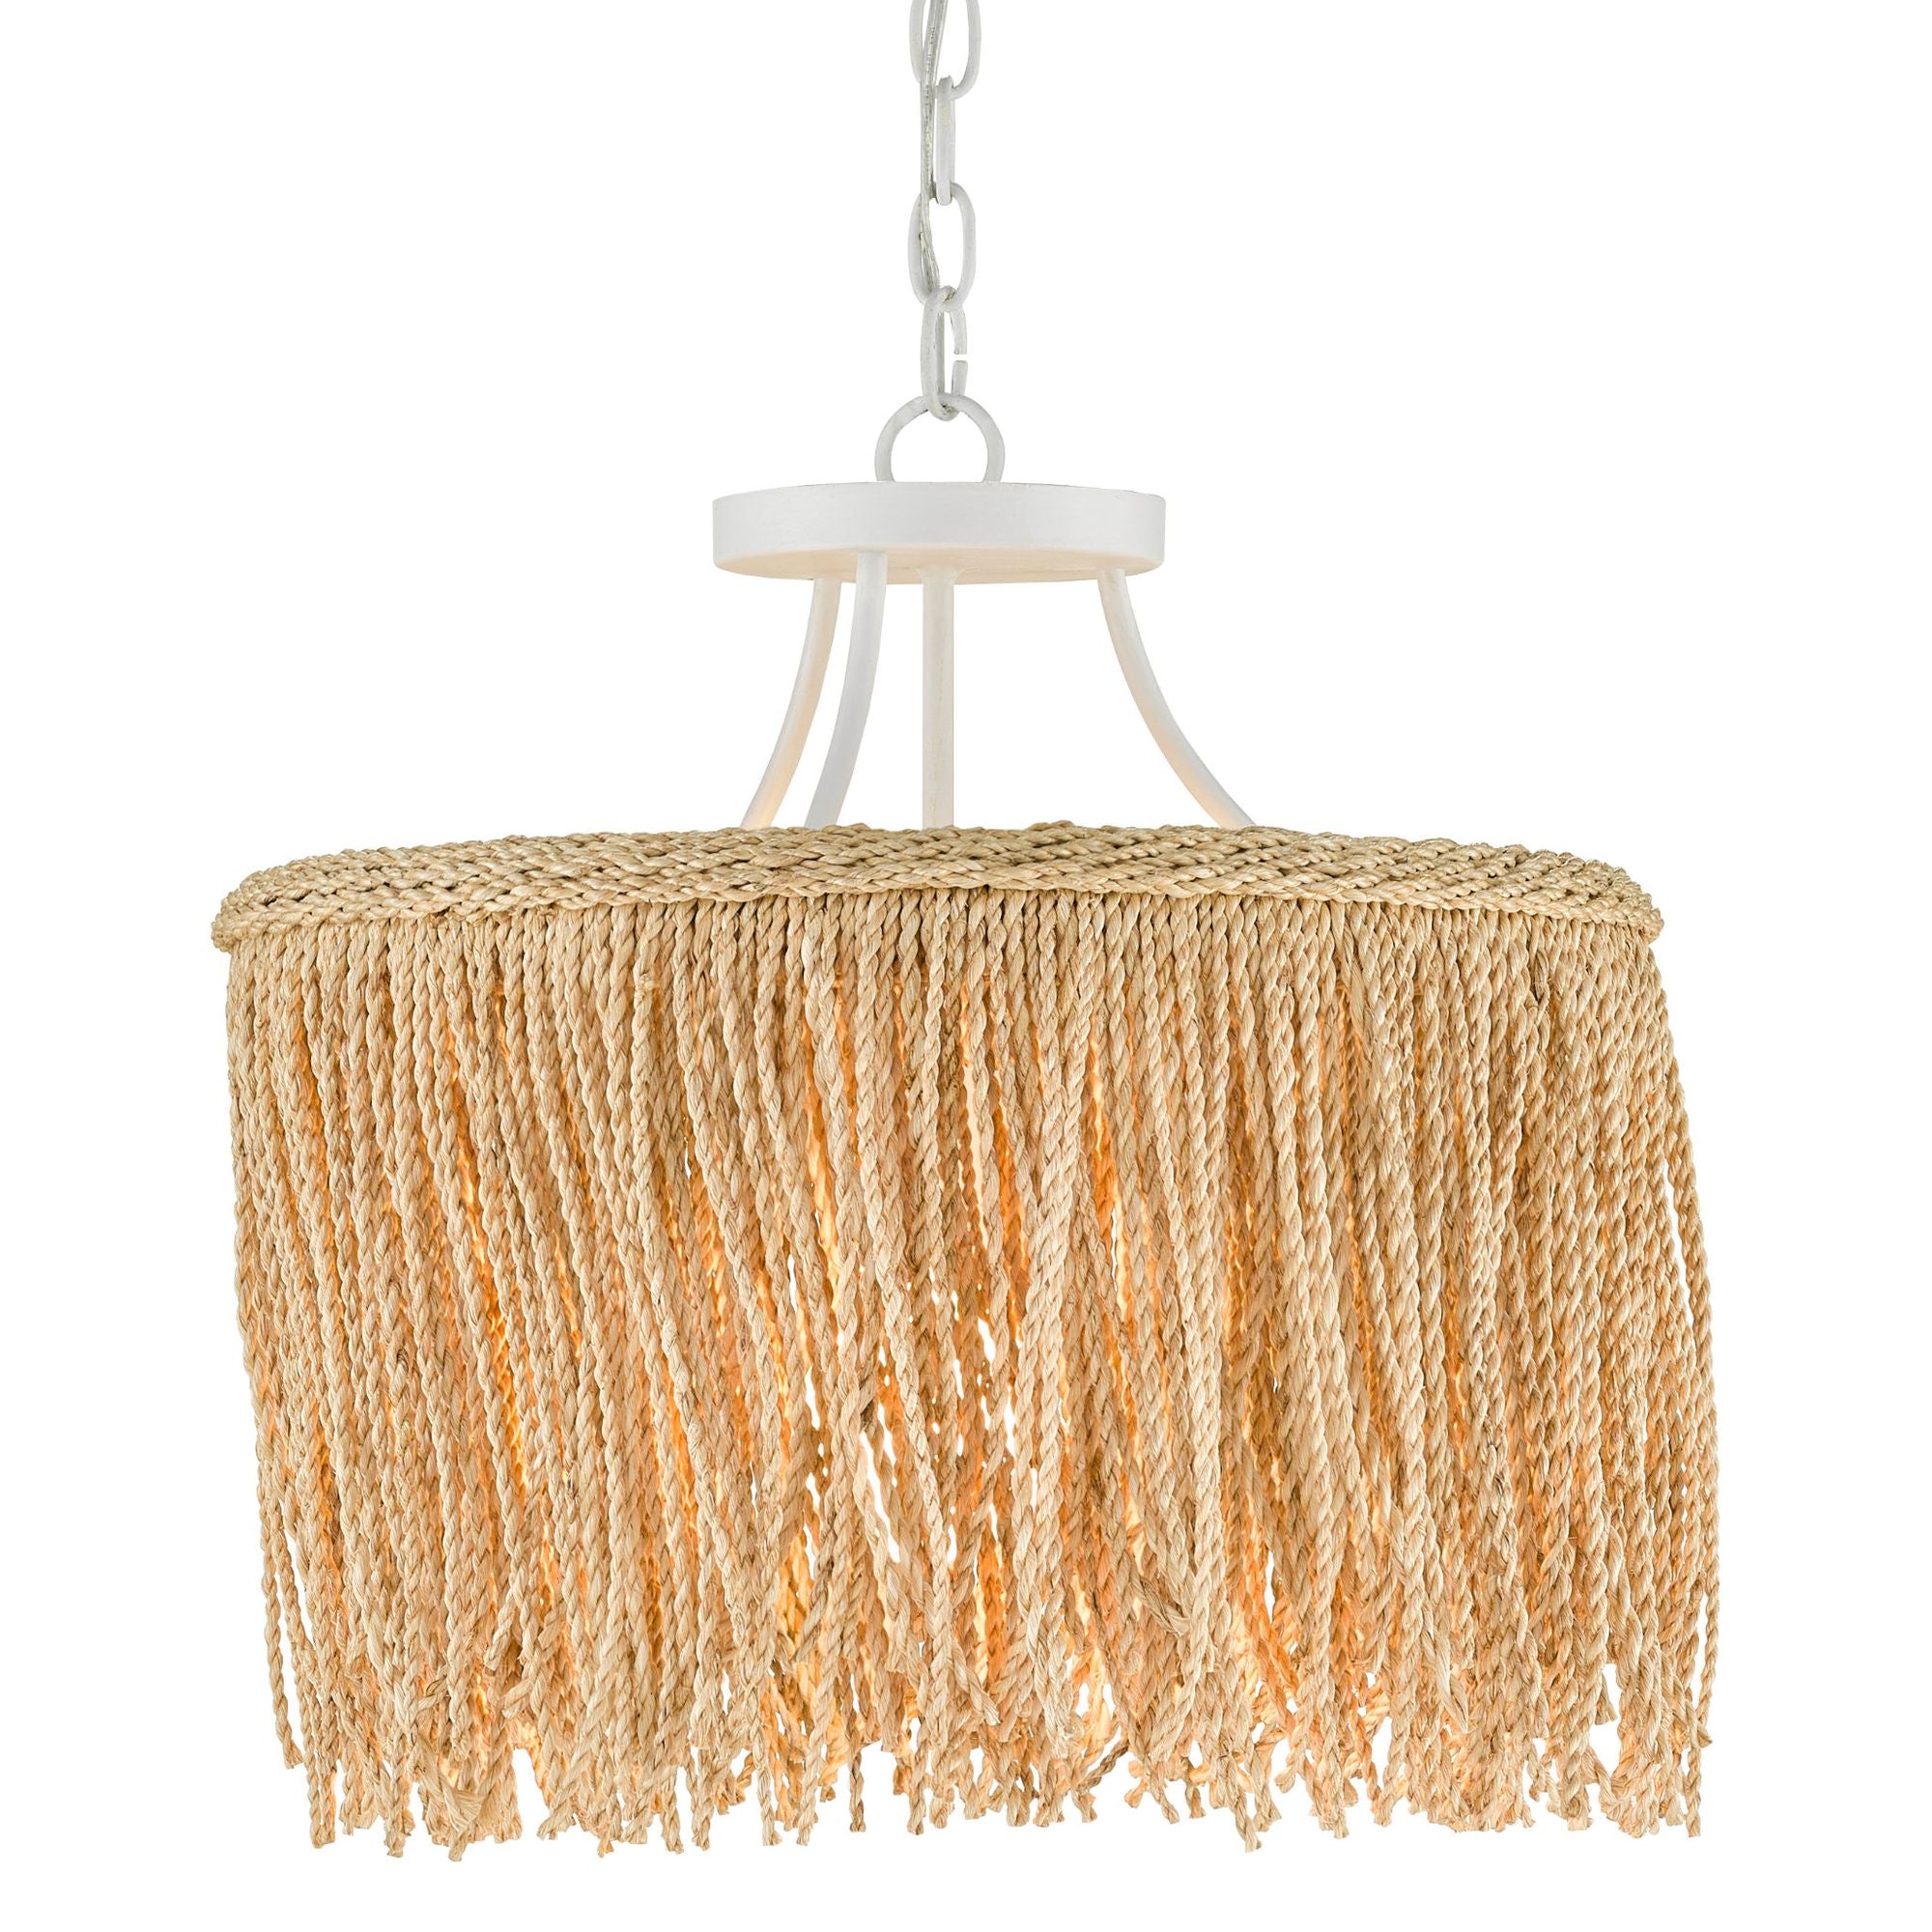 Samoa Small Rope Pendant - Gesso White/Natural Rope